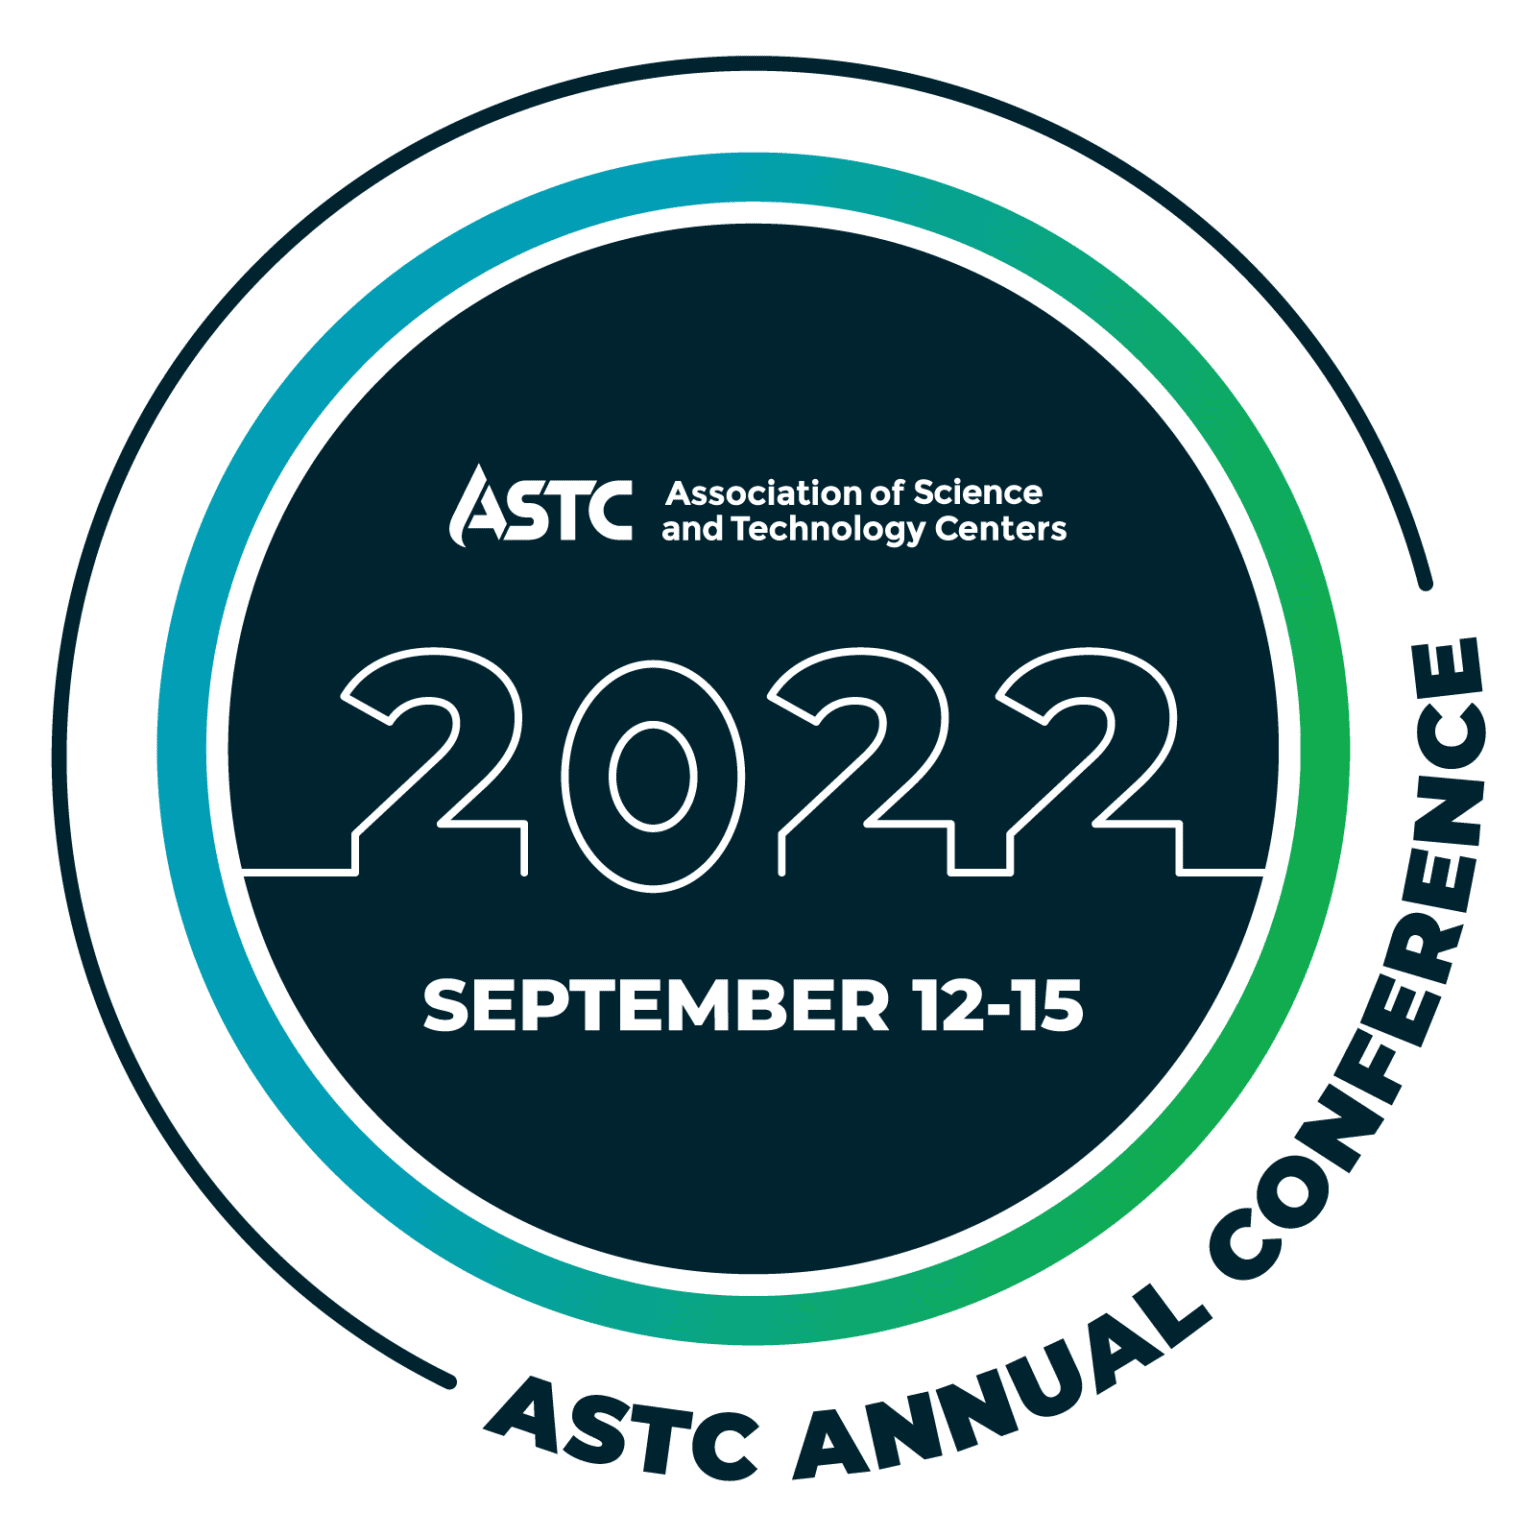 ASTC 2023 Annual Conference Association of Science and Technology Centers